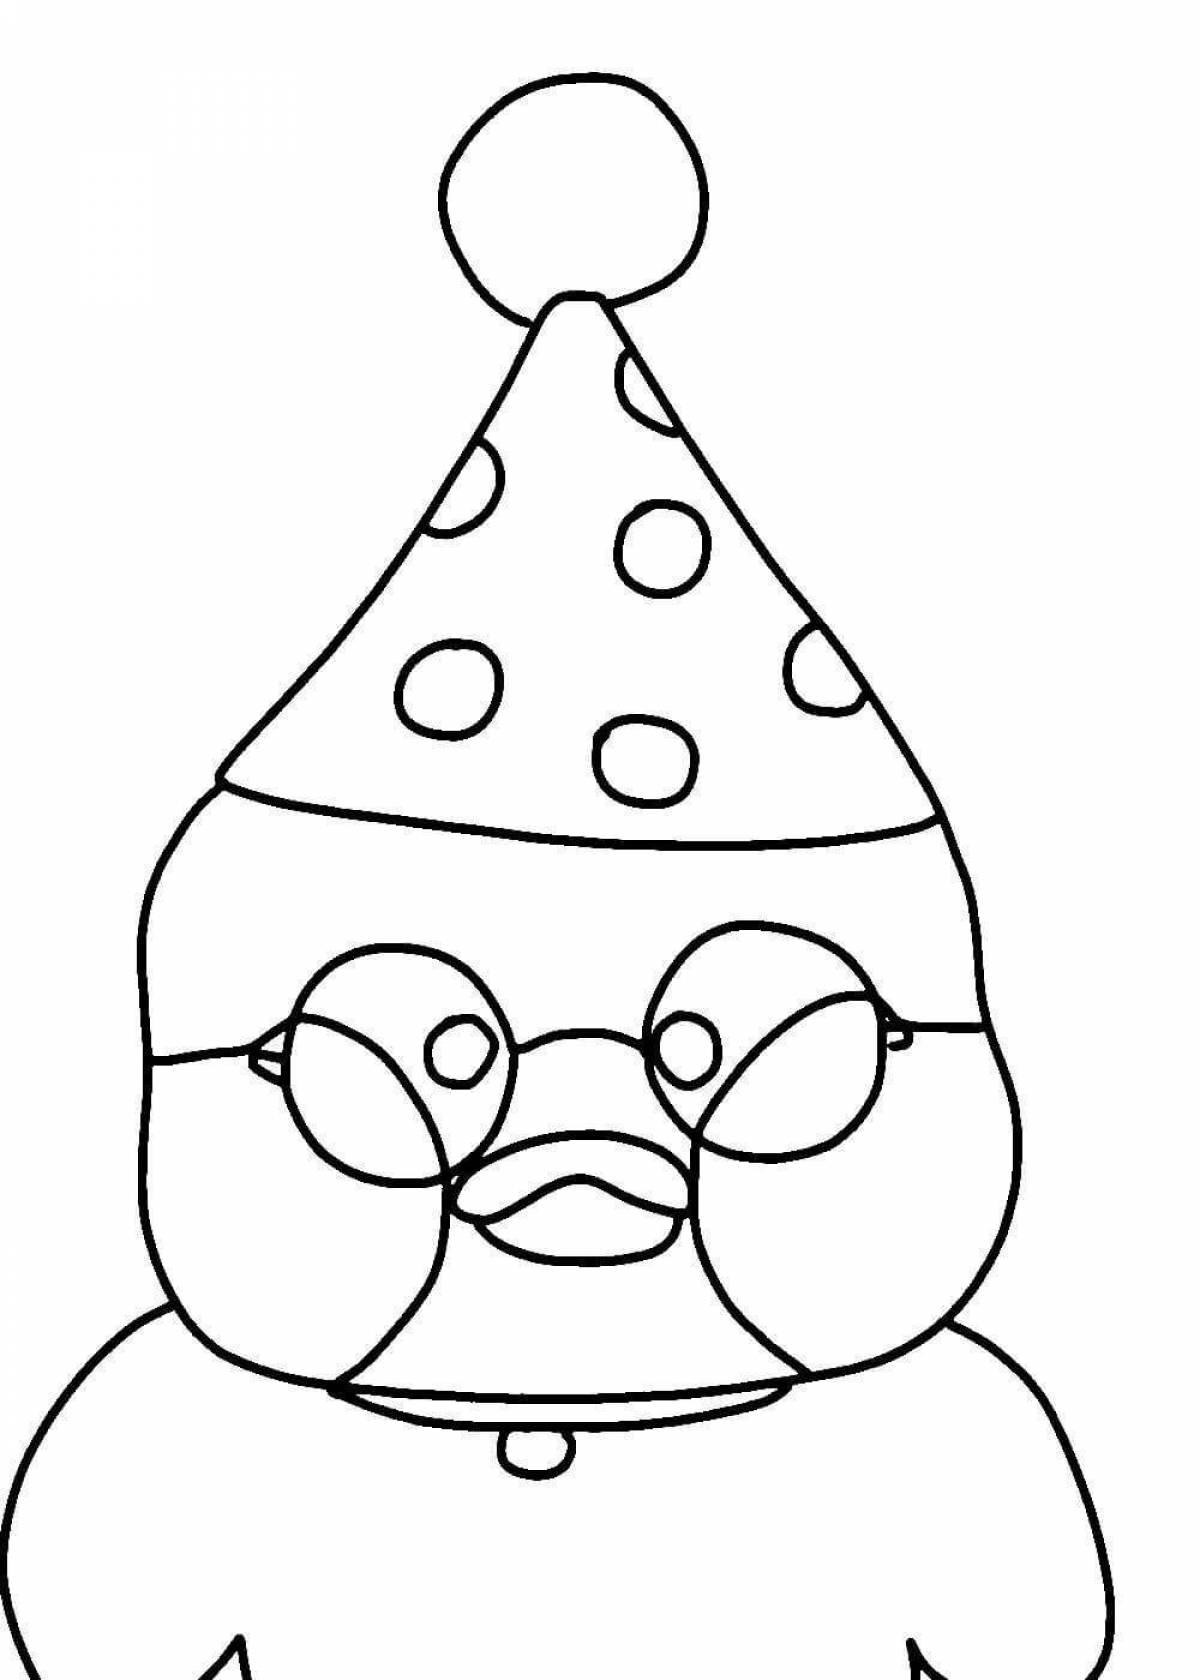 Lalafanfan glowing duck coloring page